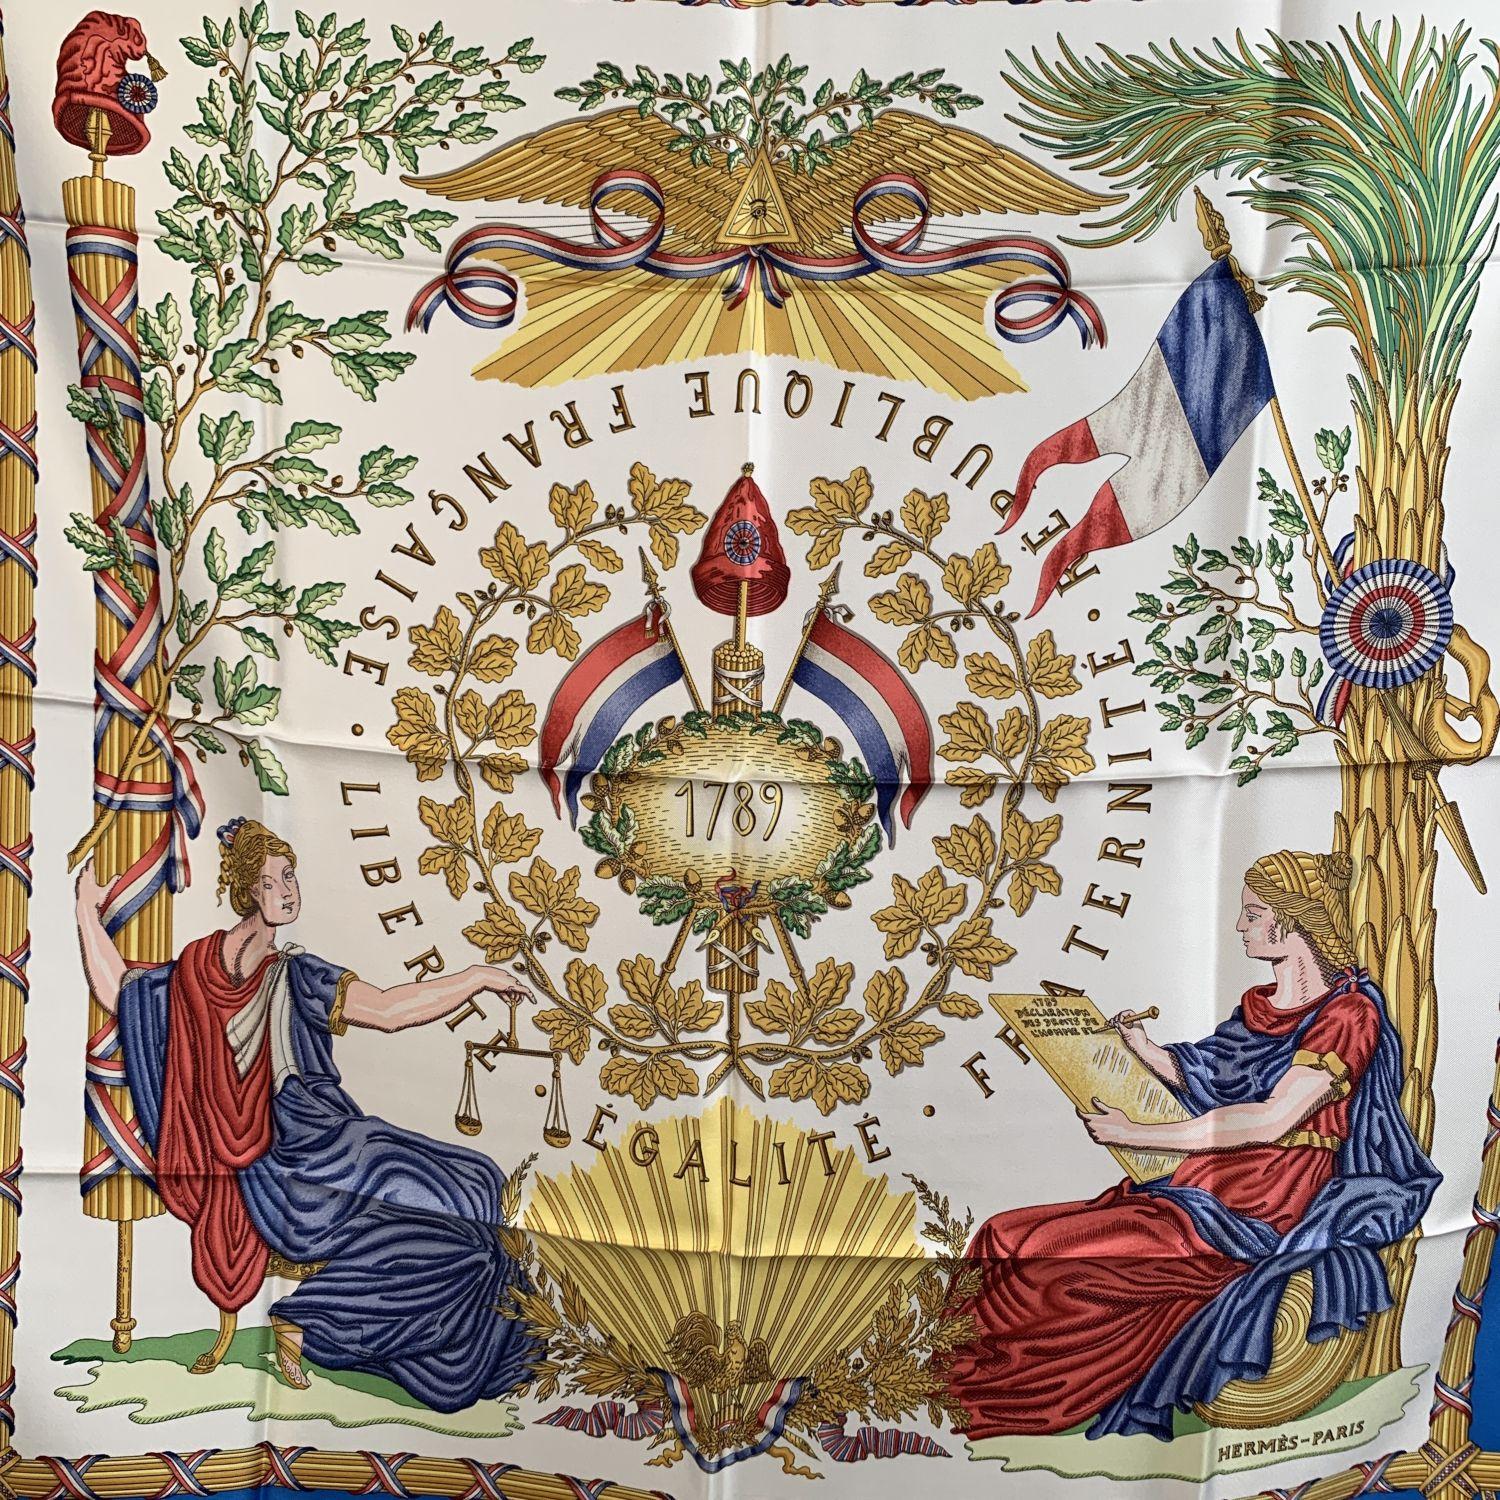 Vintage HERMES commemorative scarf ' 1789 - REPUBLIQUE FRANCAISE LIBERTE EGALITE FRATERNITE ' by Joachim Metz and originally issued in 1989, to celebrate the 200th anniversary of the French Republic. It depicts an historical allegoric design on